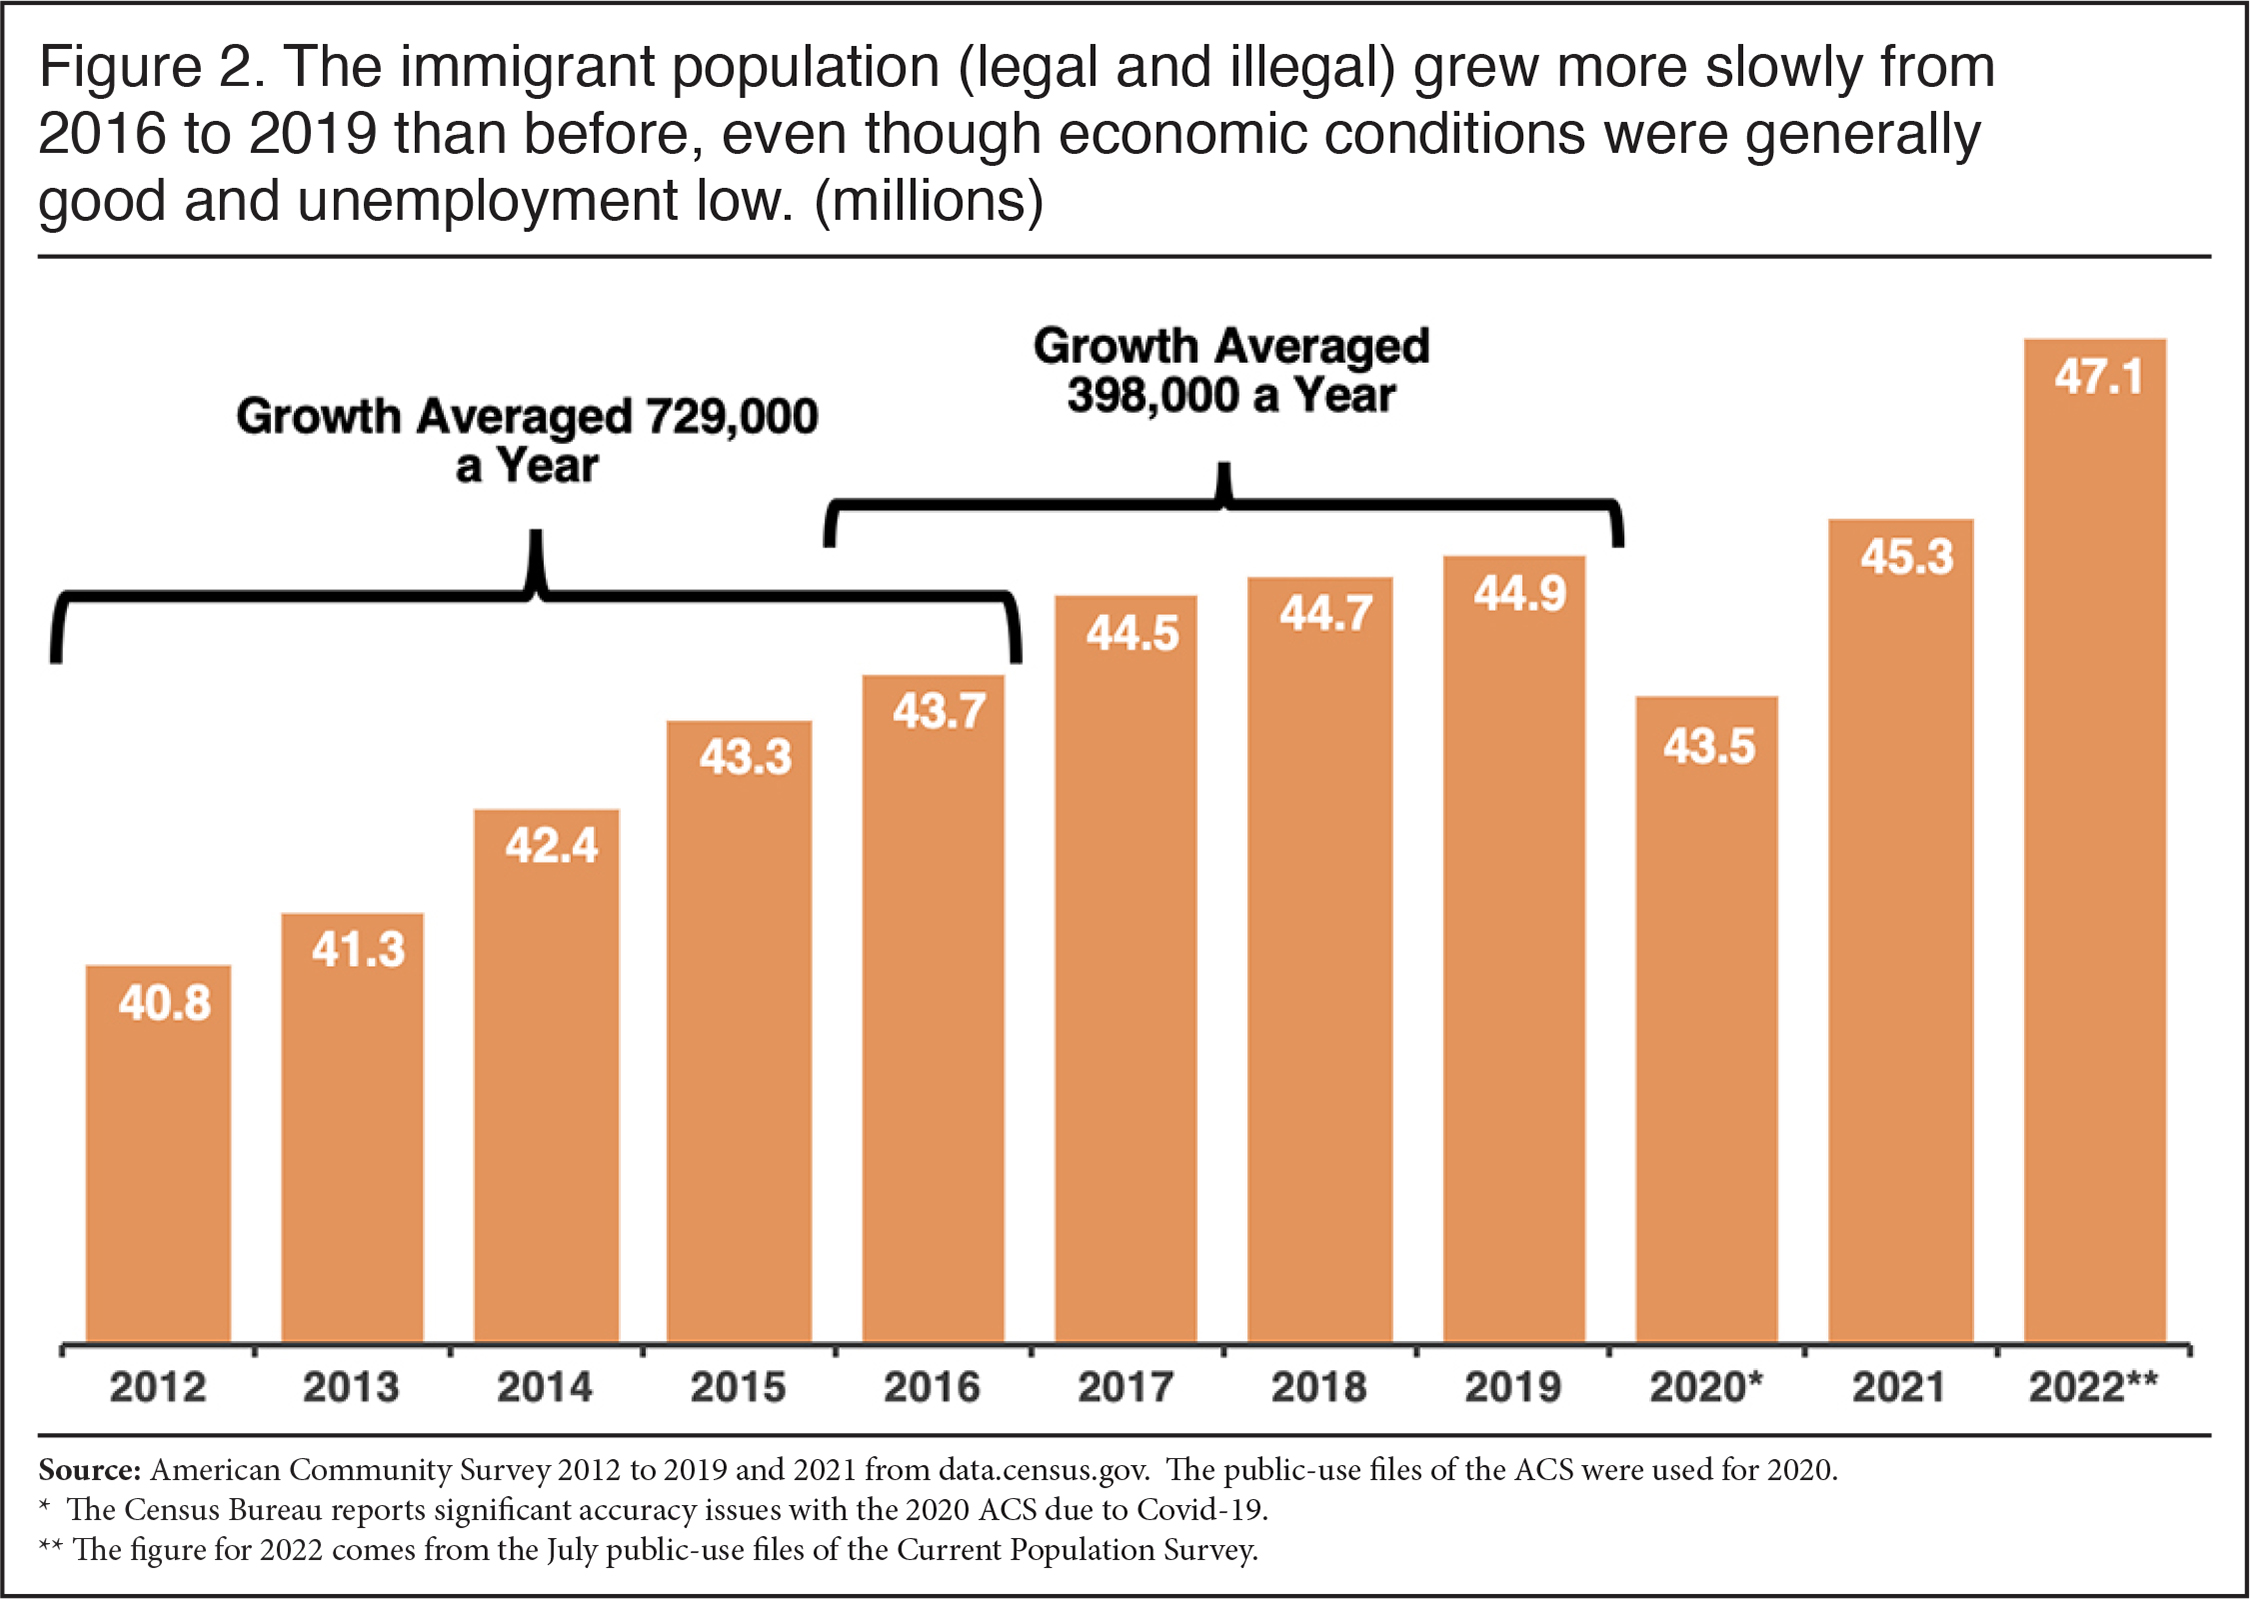 Graph: The immigrant population grew more slowly from 2016 to 2019 than before, even though economic conditions were generally good and unemployment low